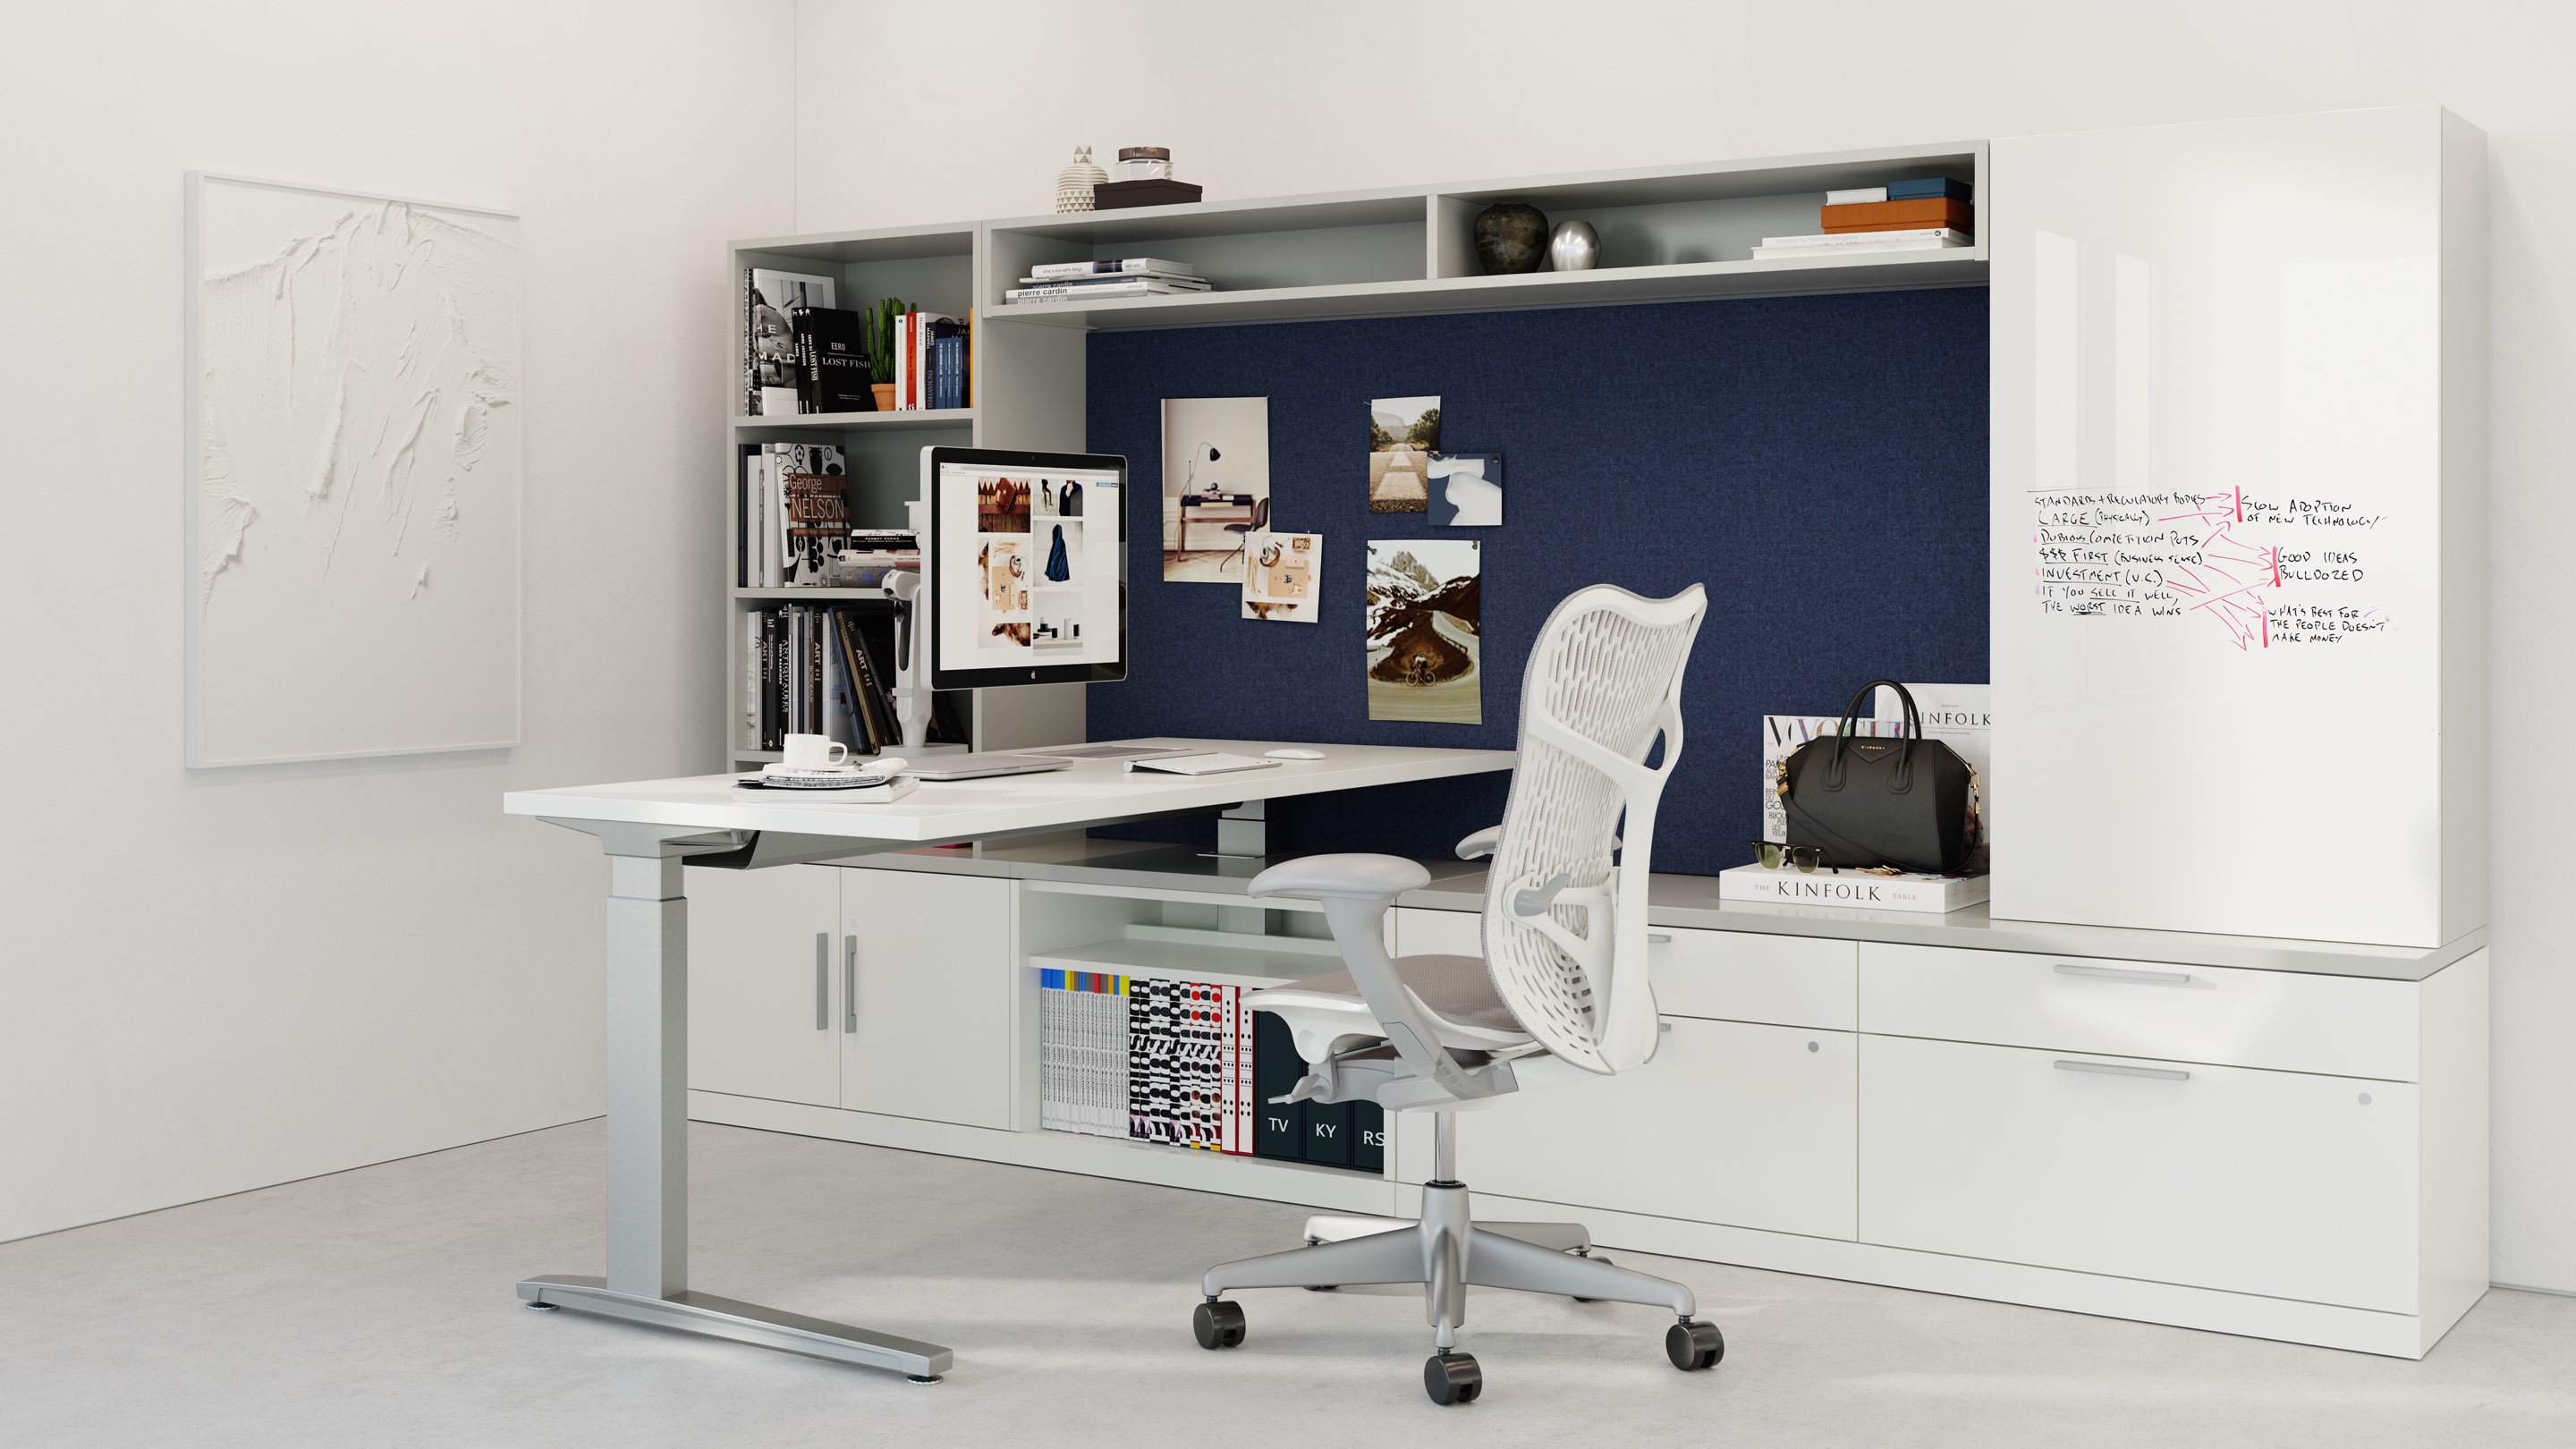 SUITABLE FOR TEMPORARY HOME OFFICE TABLE HERMAN MILLER ADJUSTABLE HEIGHT DESK 